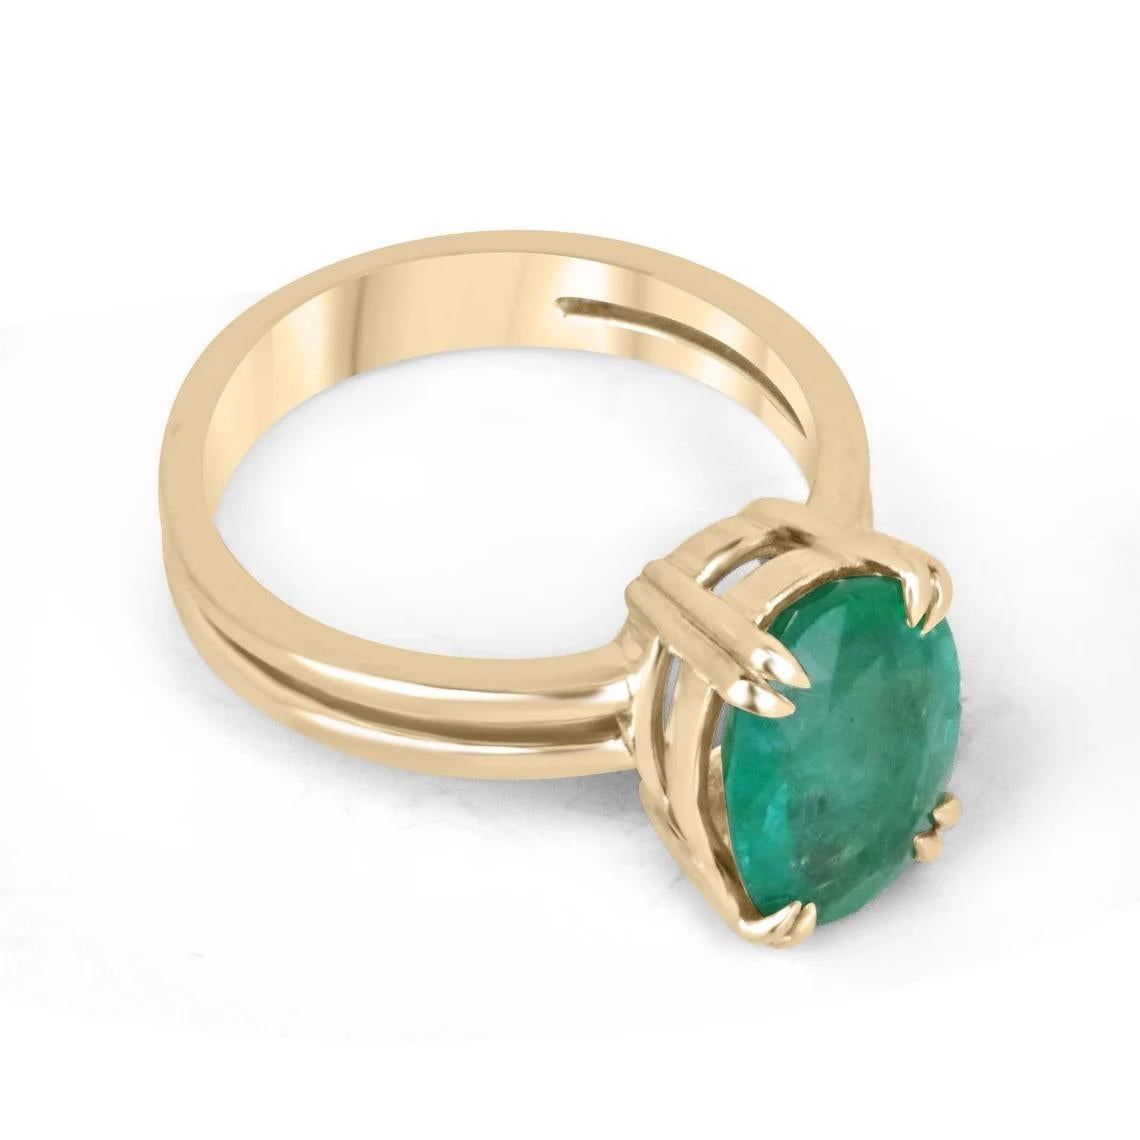 This solitaire ring is a beautiful and elegant piece of jewelry, featuring a 2.90-carat oval cut emerald as its centerpiece. The emerald boasts a rich, lush green color and displays good levels of clarity and luster, making it a truly exceptional